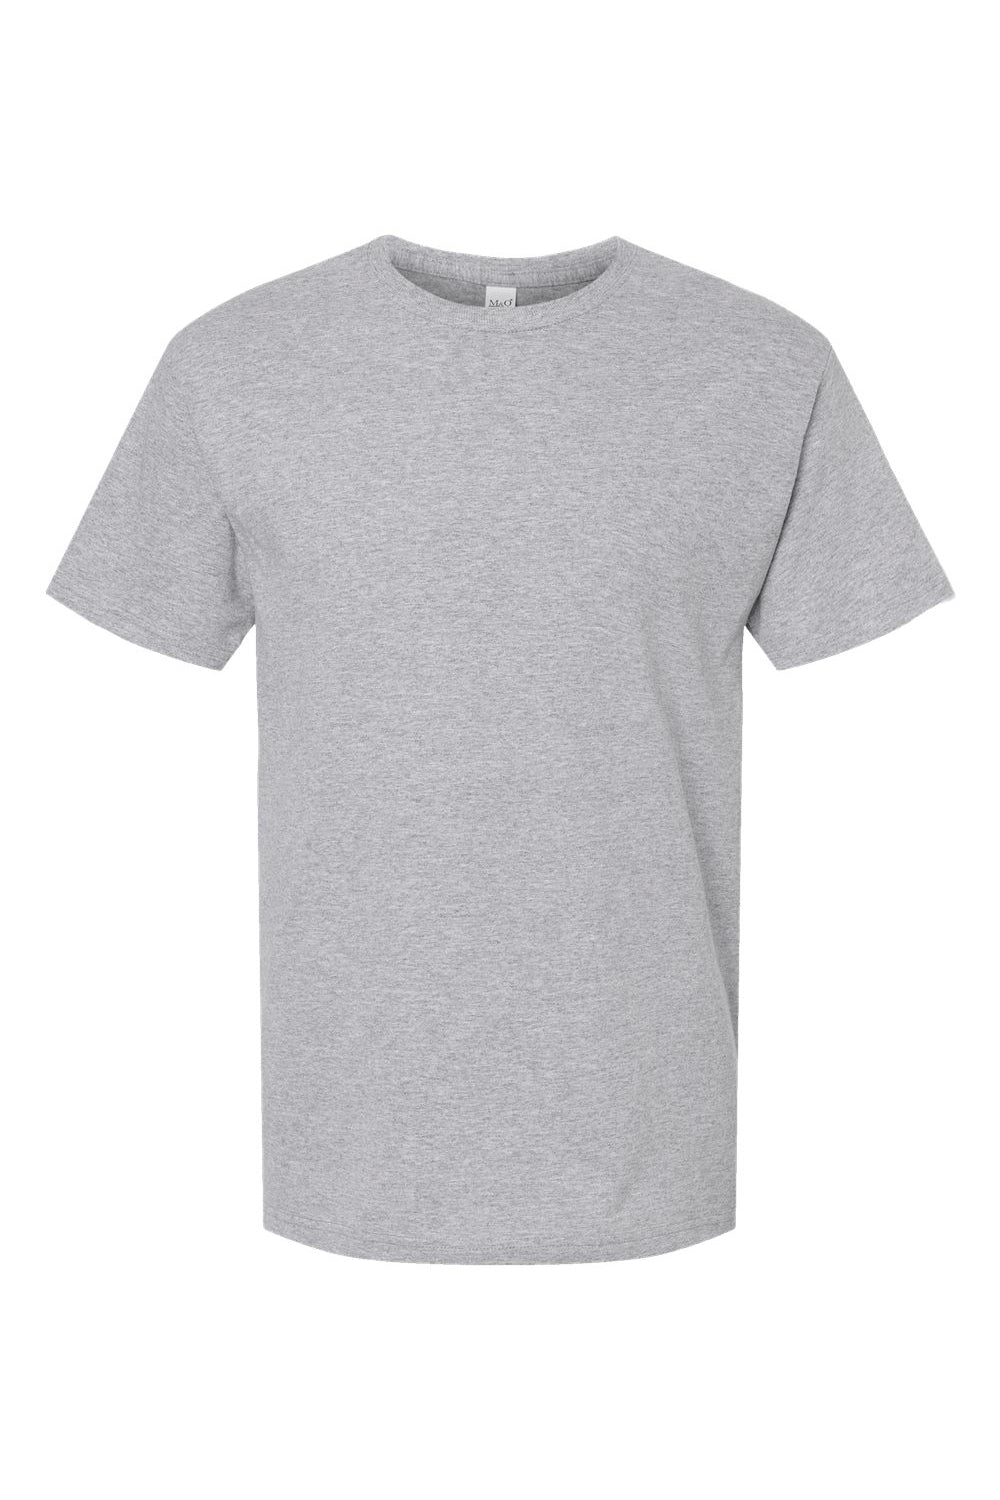 M&O 4800 Mens Gold Soft Touch Short Sleeve Crewneck T-Shirt Athletic Grey Flat Front